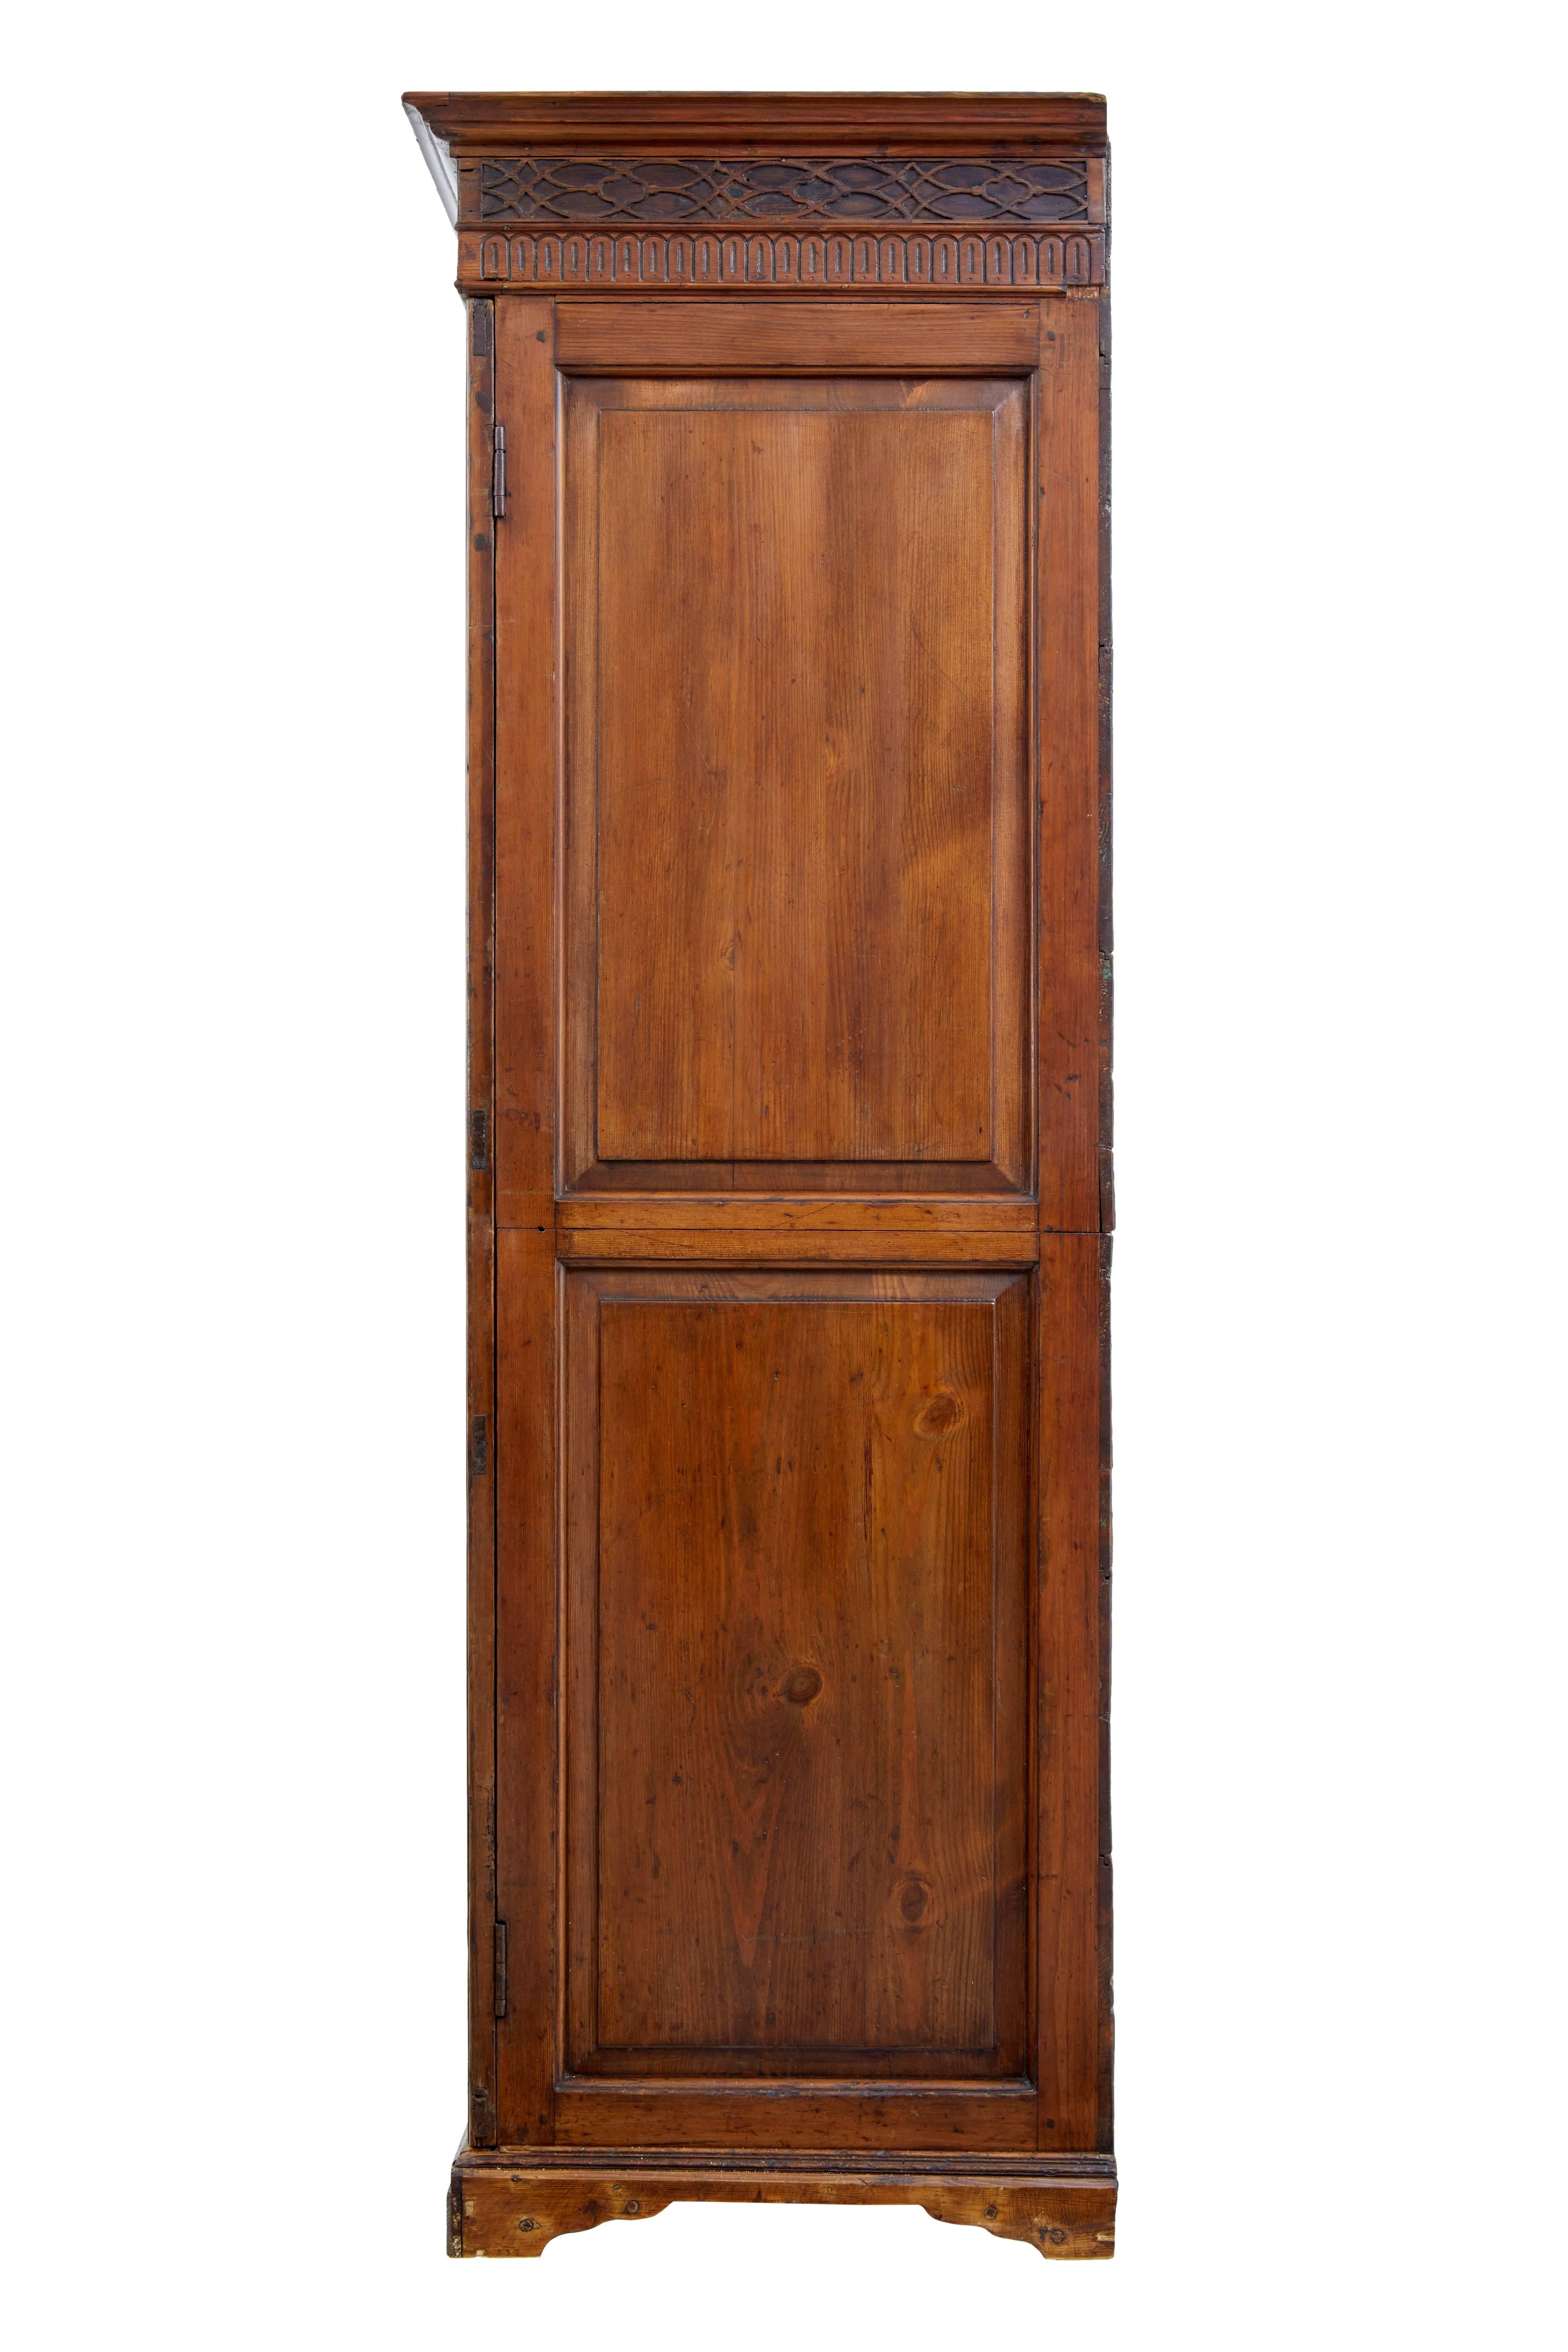 British 19th Century English William IV Pine House Keepers Cupboard